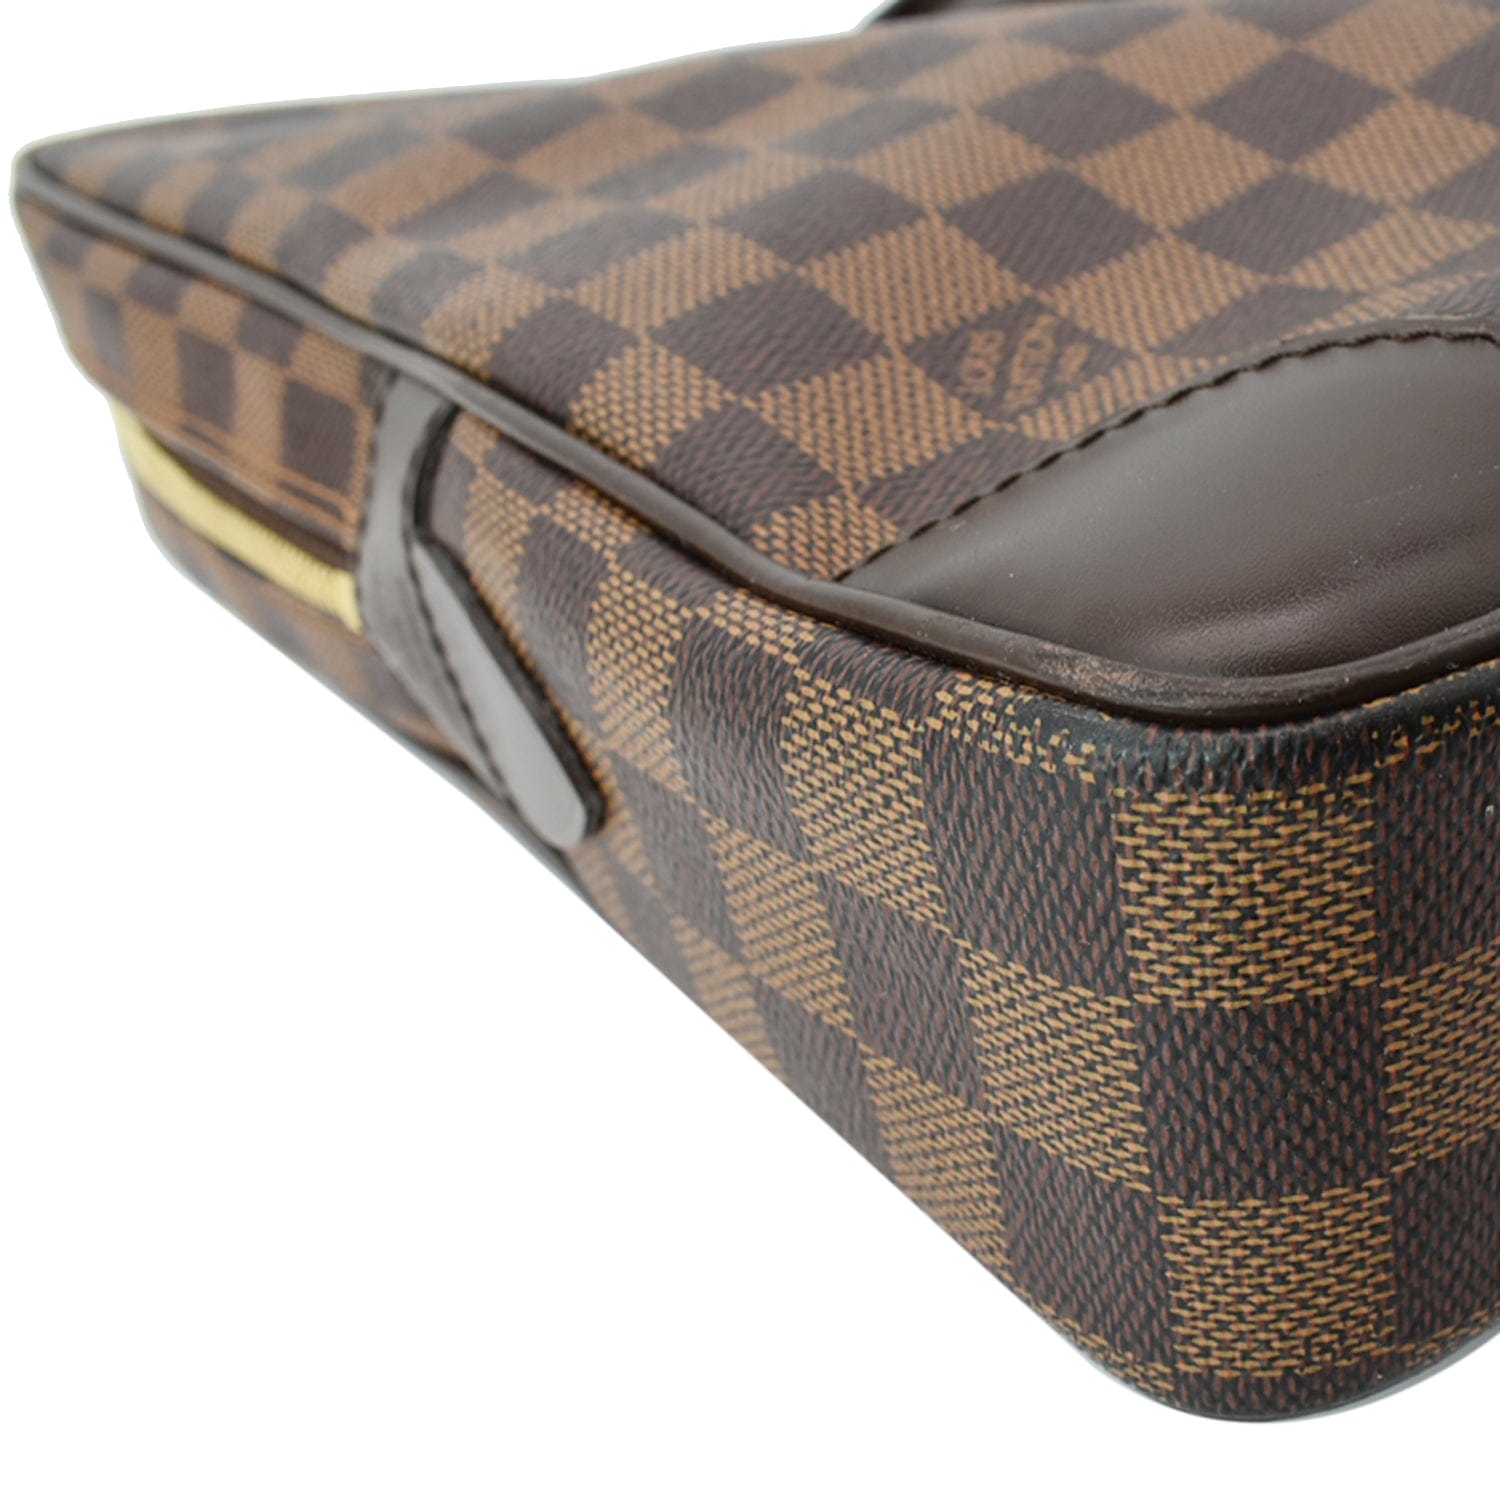 Louis Vuitton Brown Leather Porte Documents Voyage Briefcase Bag at 1stDibs